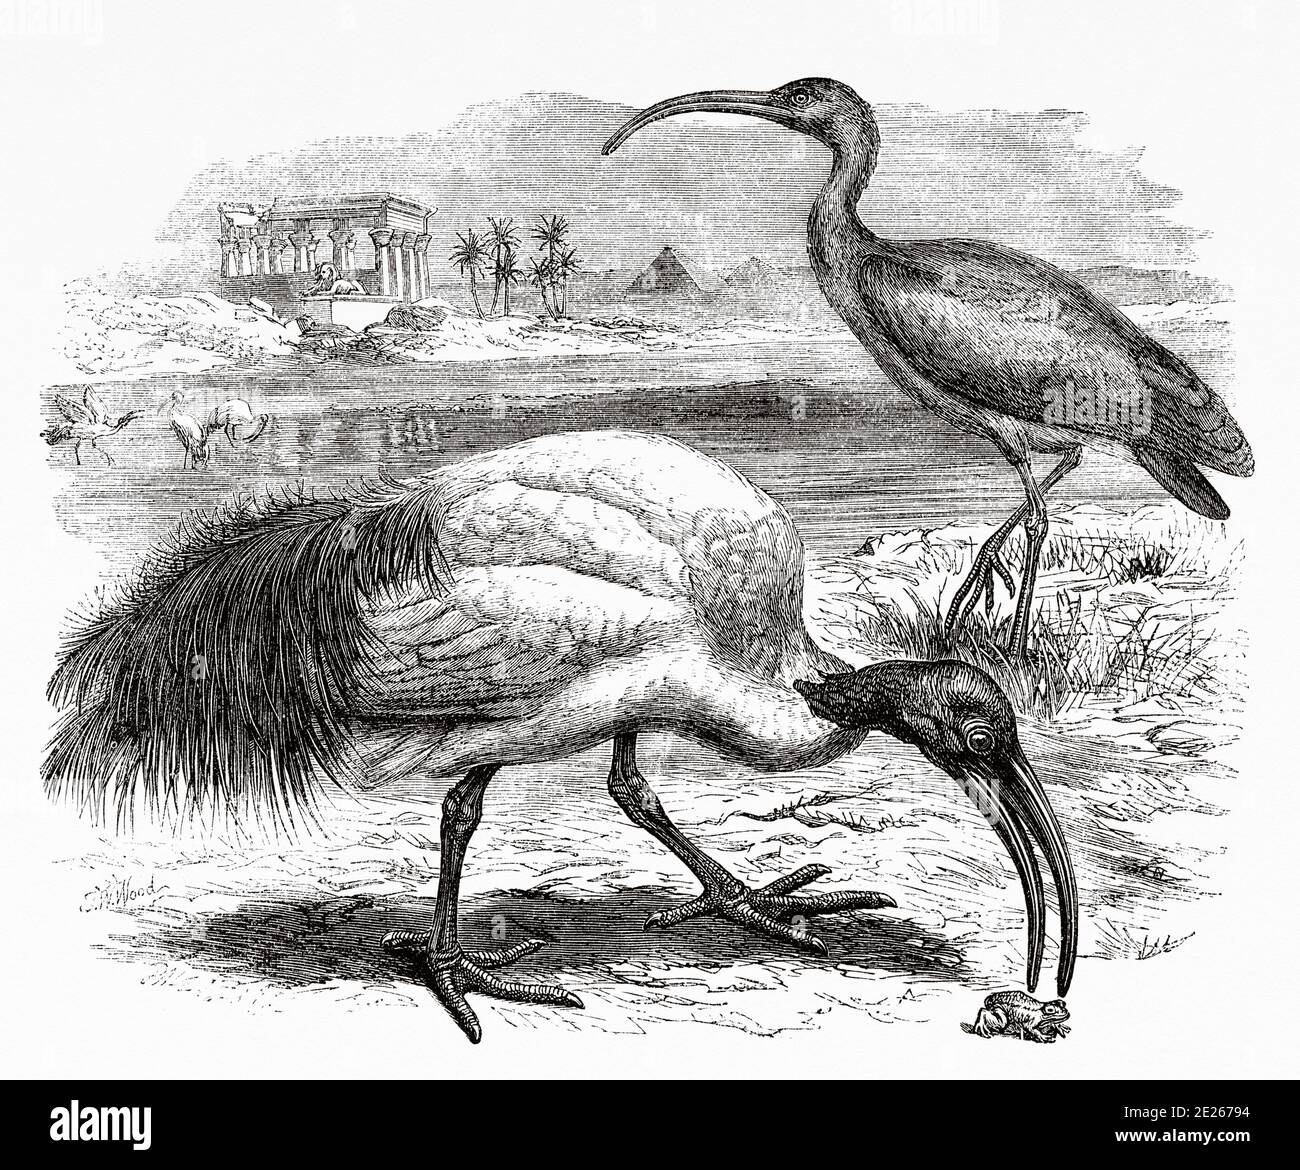 Ibis. The Tresquiornitinos (Threskiornithinae) Subfamily of pelecaniformes birds of the family Threskiornithidae, known as ibis, a word from the Greek, which in turn comes from the ancient Egyptian hib. The Last Journals of David Livingstone  Scottish missionary and explorer, 1866-1873. Old engraving El Mundo en la Mano 1878 Stock Photo